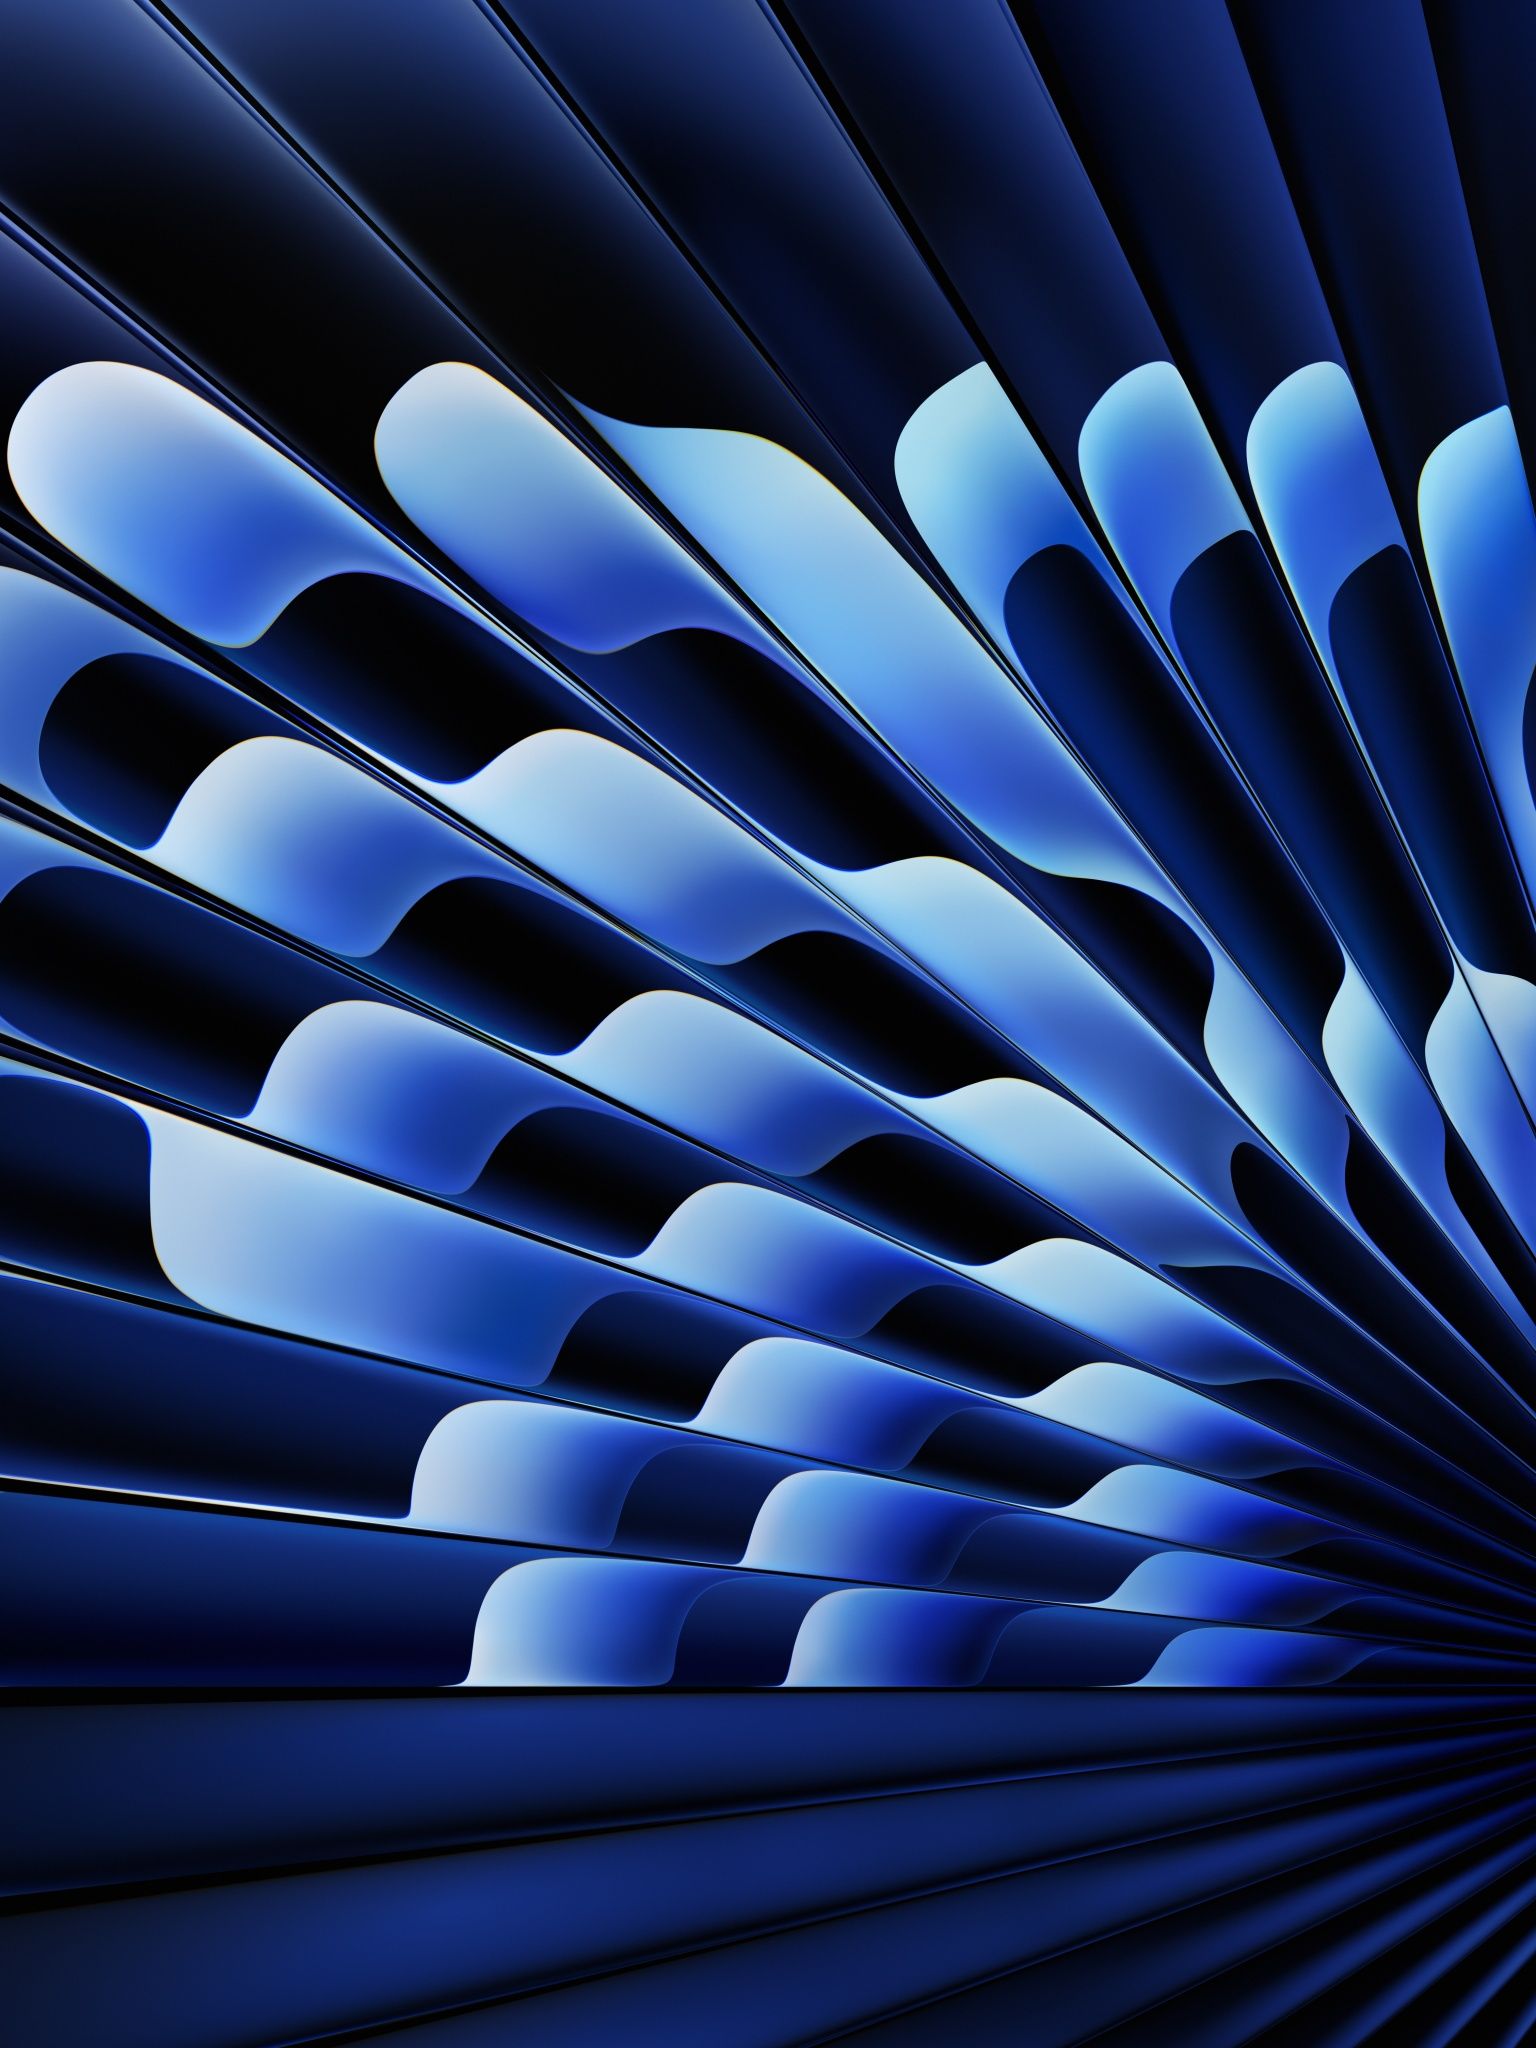 A blue abstract background with curved lines - Dark blue